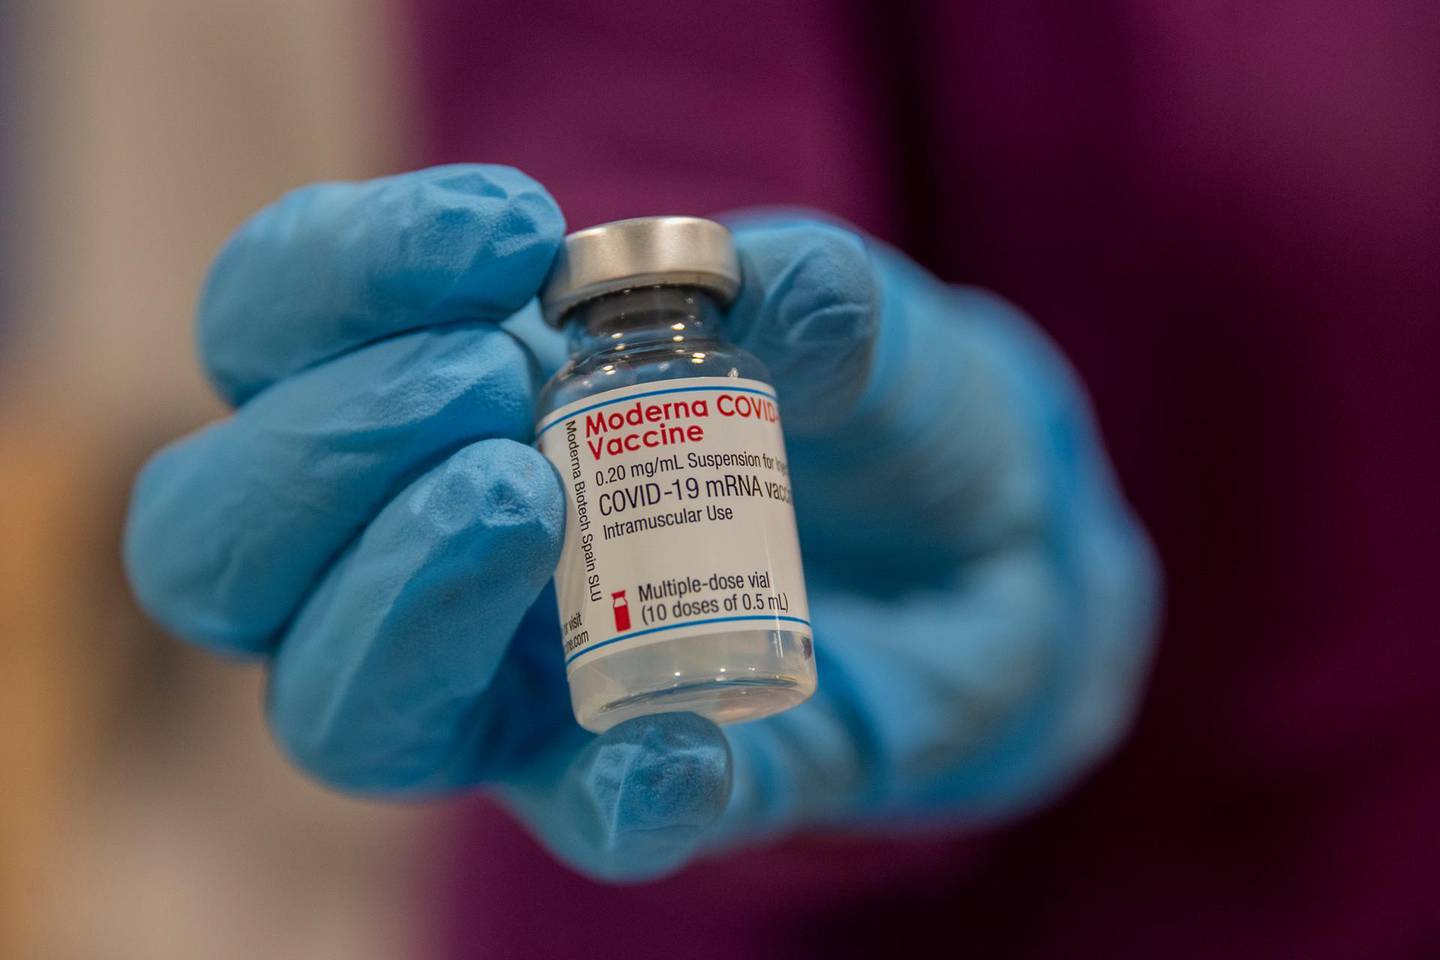 A health worker holds a vial of the Moderna vaccine, during a COVID-19 vaccination campaign at the Nurse Isabel Zendal Hospital in Madrid, Spain, Wednesday, March 17, 2021. (AP Photo/Manu Fernandez)